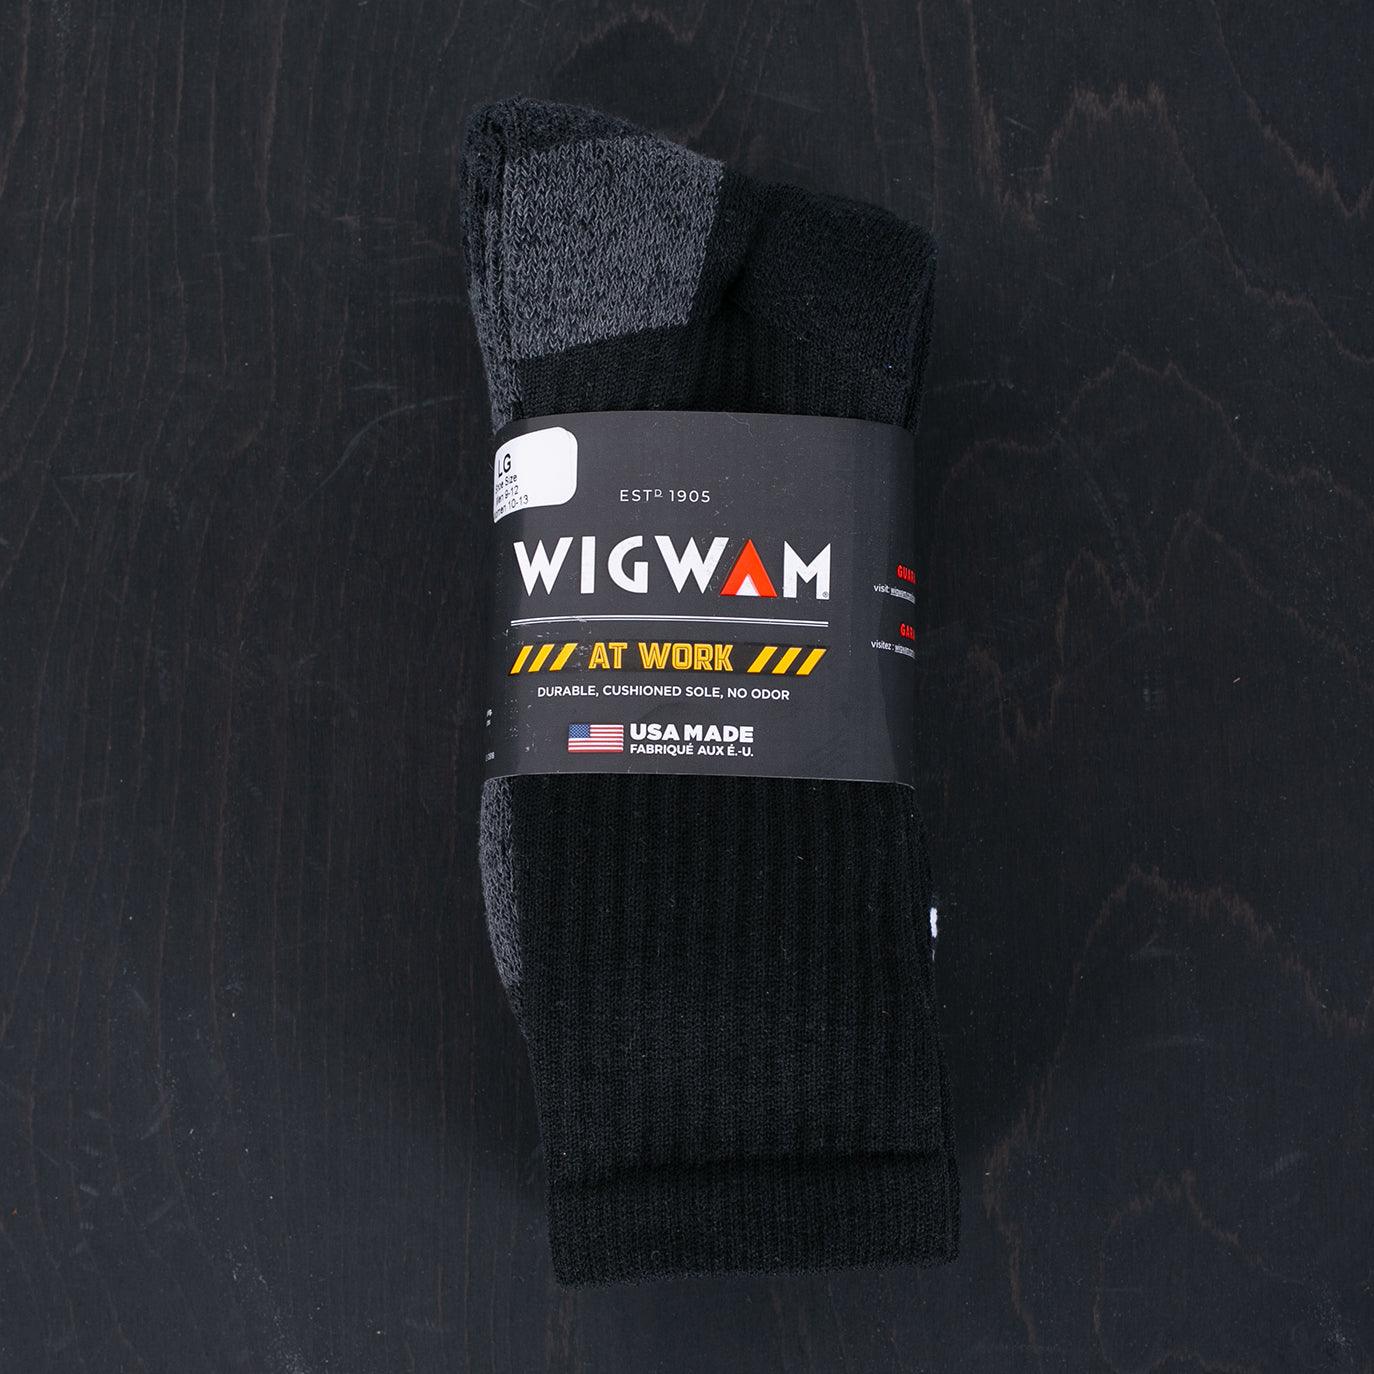 Image showing the WI-S1221-BLK - Wigwam At Work Crew 3-Pack Socks Black which is a Socks described by the following info Footwear, IHSALE_M23, Socks, Wigwam and sold on the IRON HEART GERMANY online store